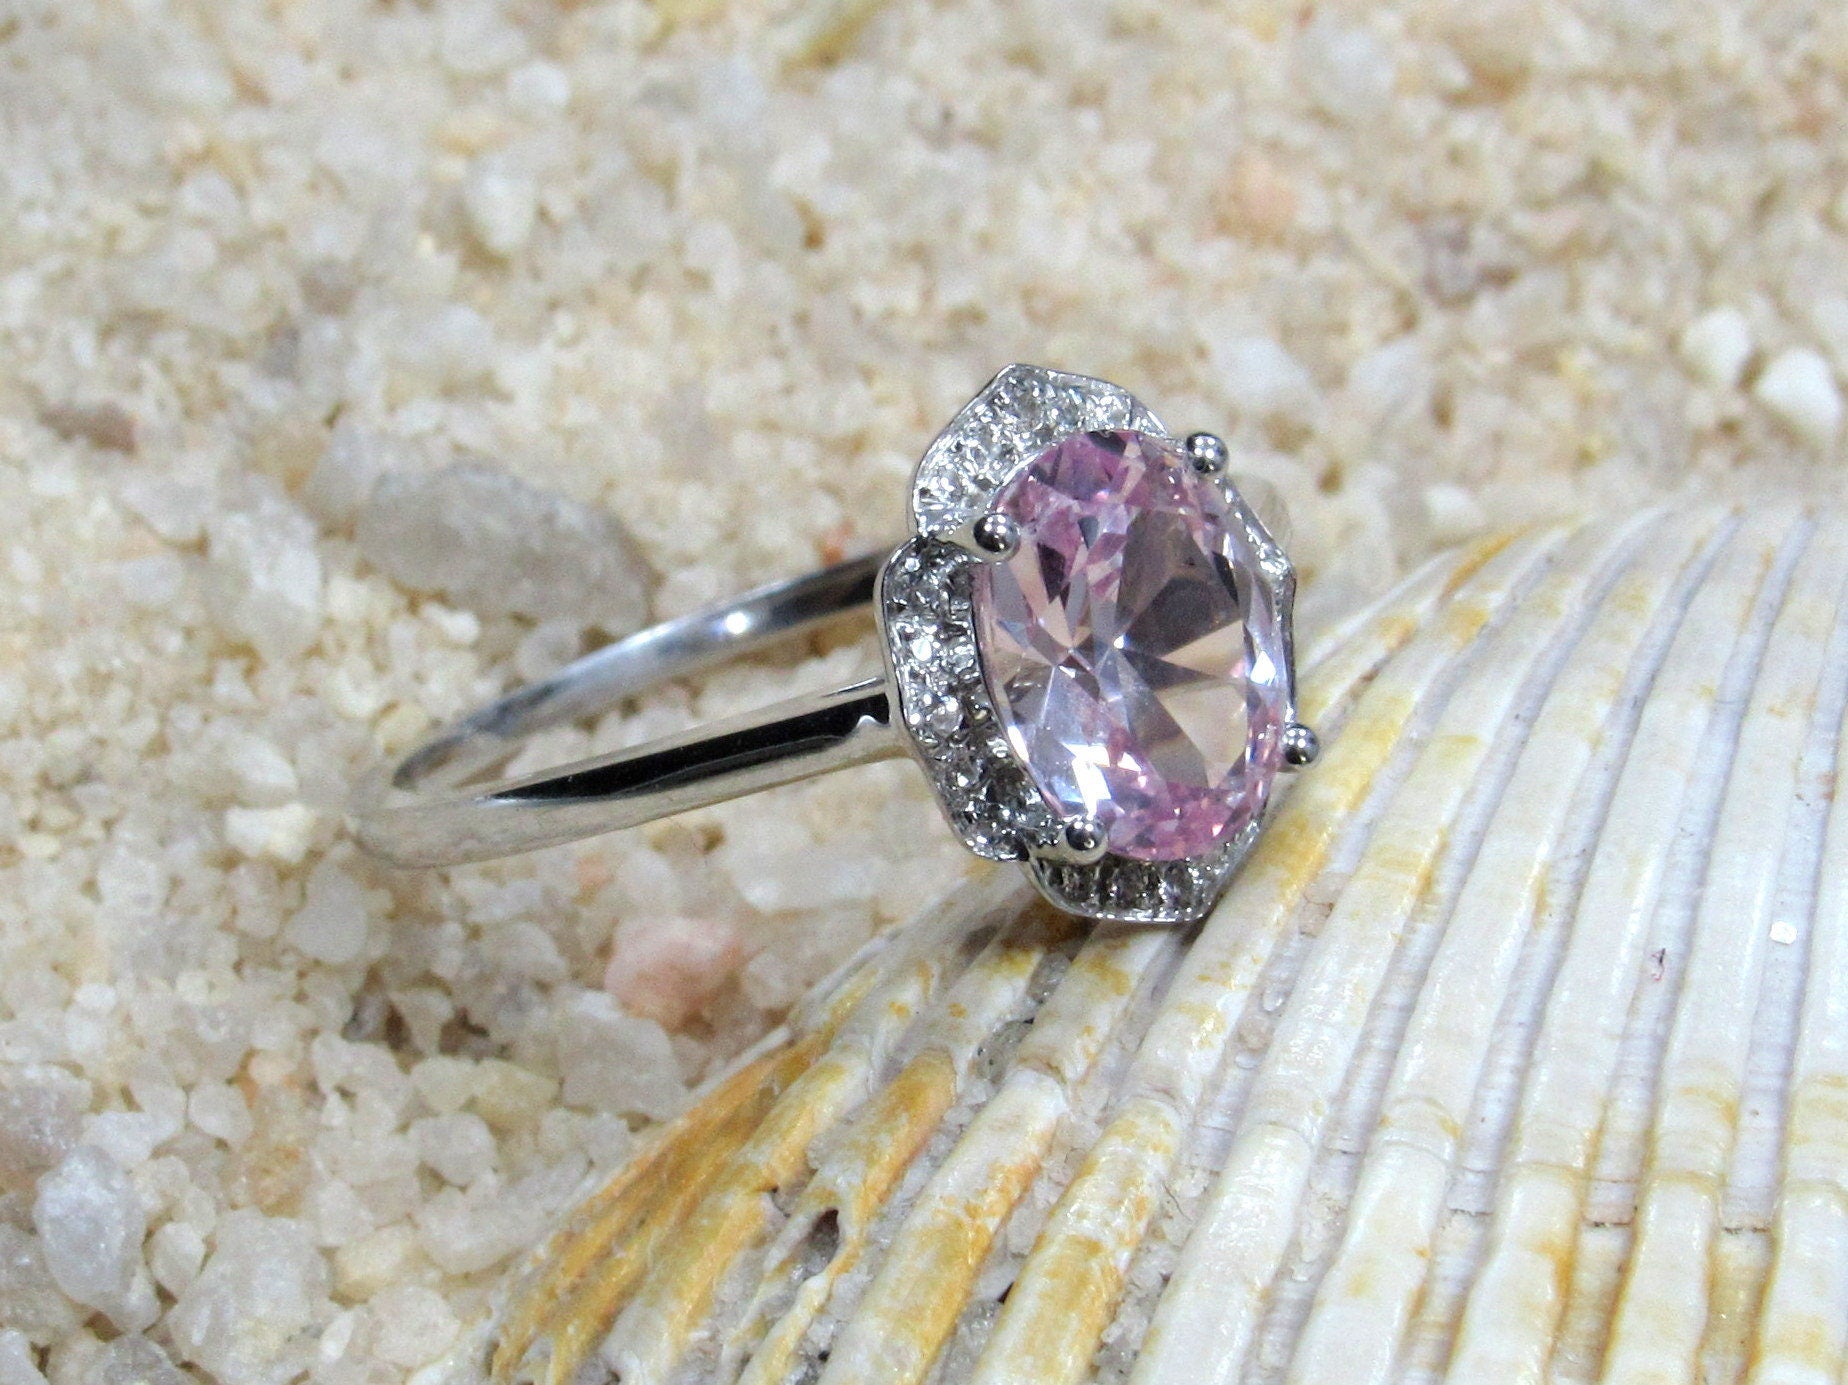 Ruby Oval Engagement Ring, Floral Ring, Sospita, 2ct Ring, White-Yellow-Rose Gold-10k-14k-18k-Platinum, 8x6mm Oval BellaMoreDesign.com